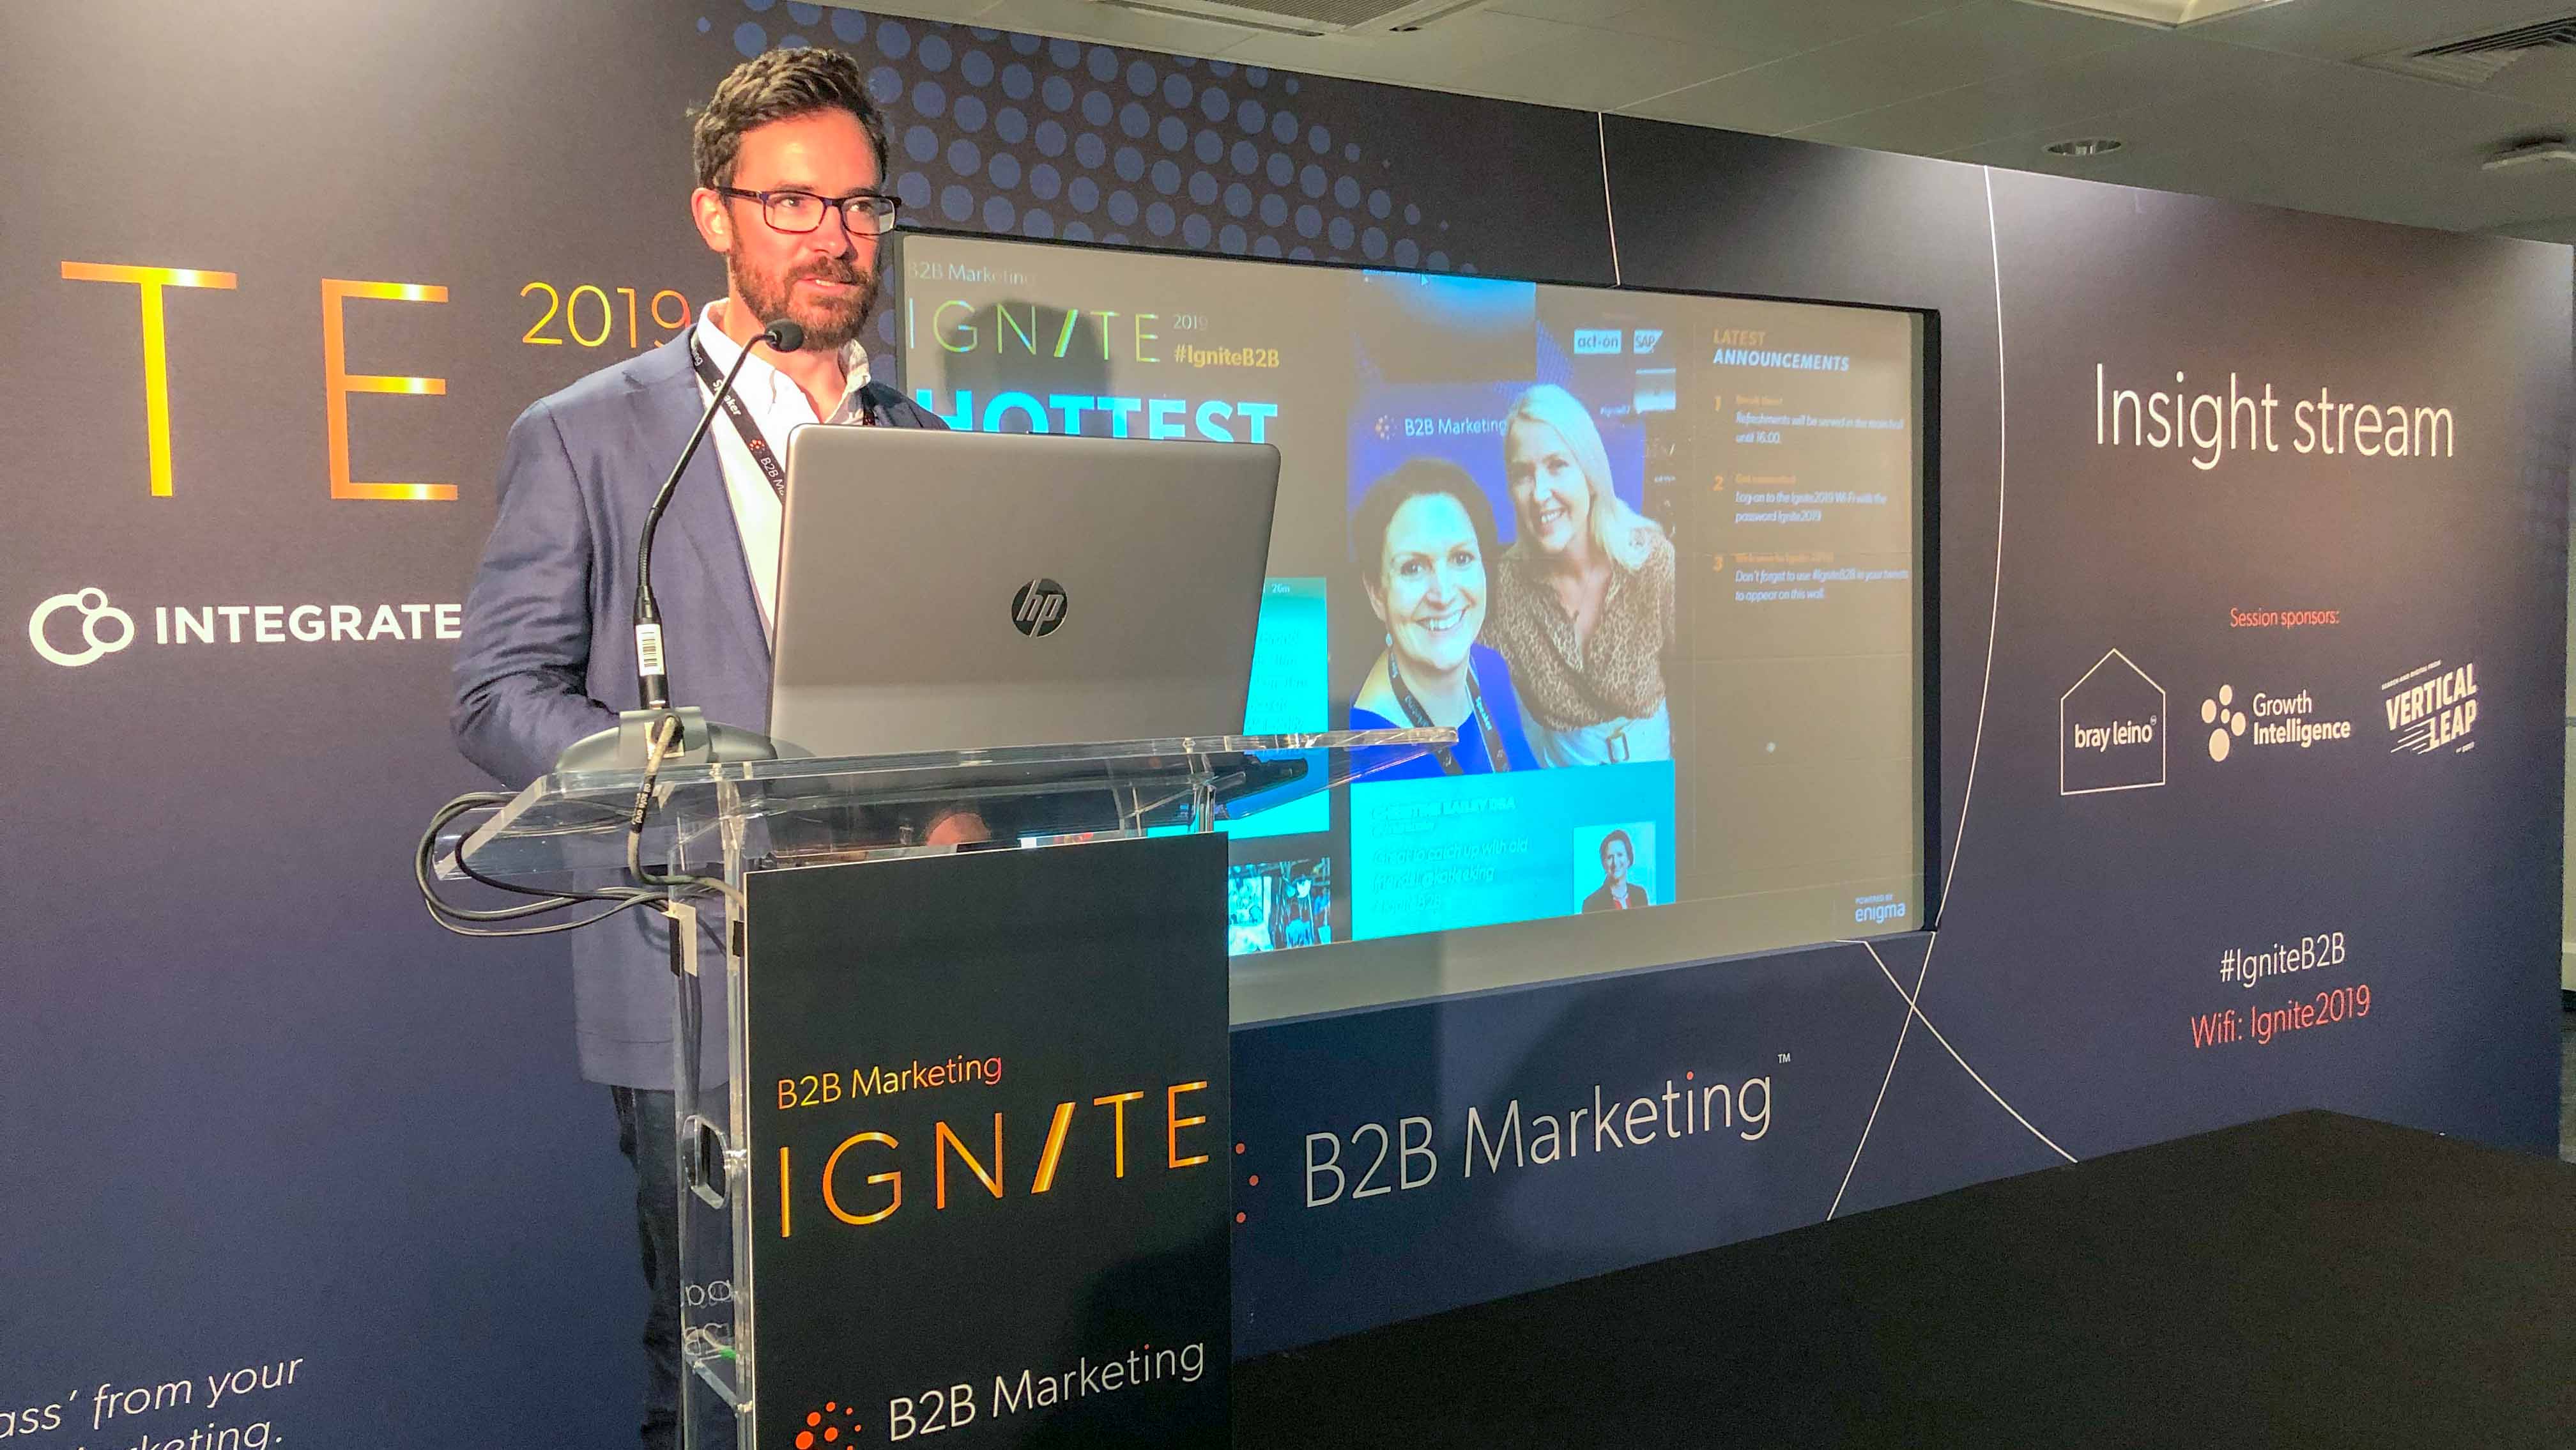 Pete Morgan sharing actionable insight to help marketers improve ROI at Ignite B2B 2019.